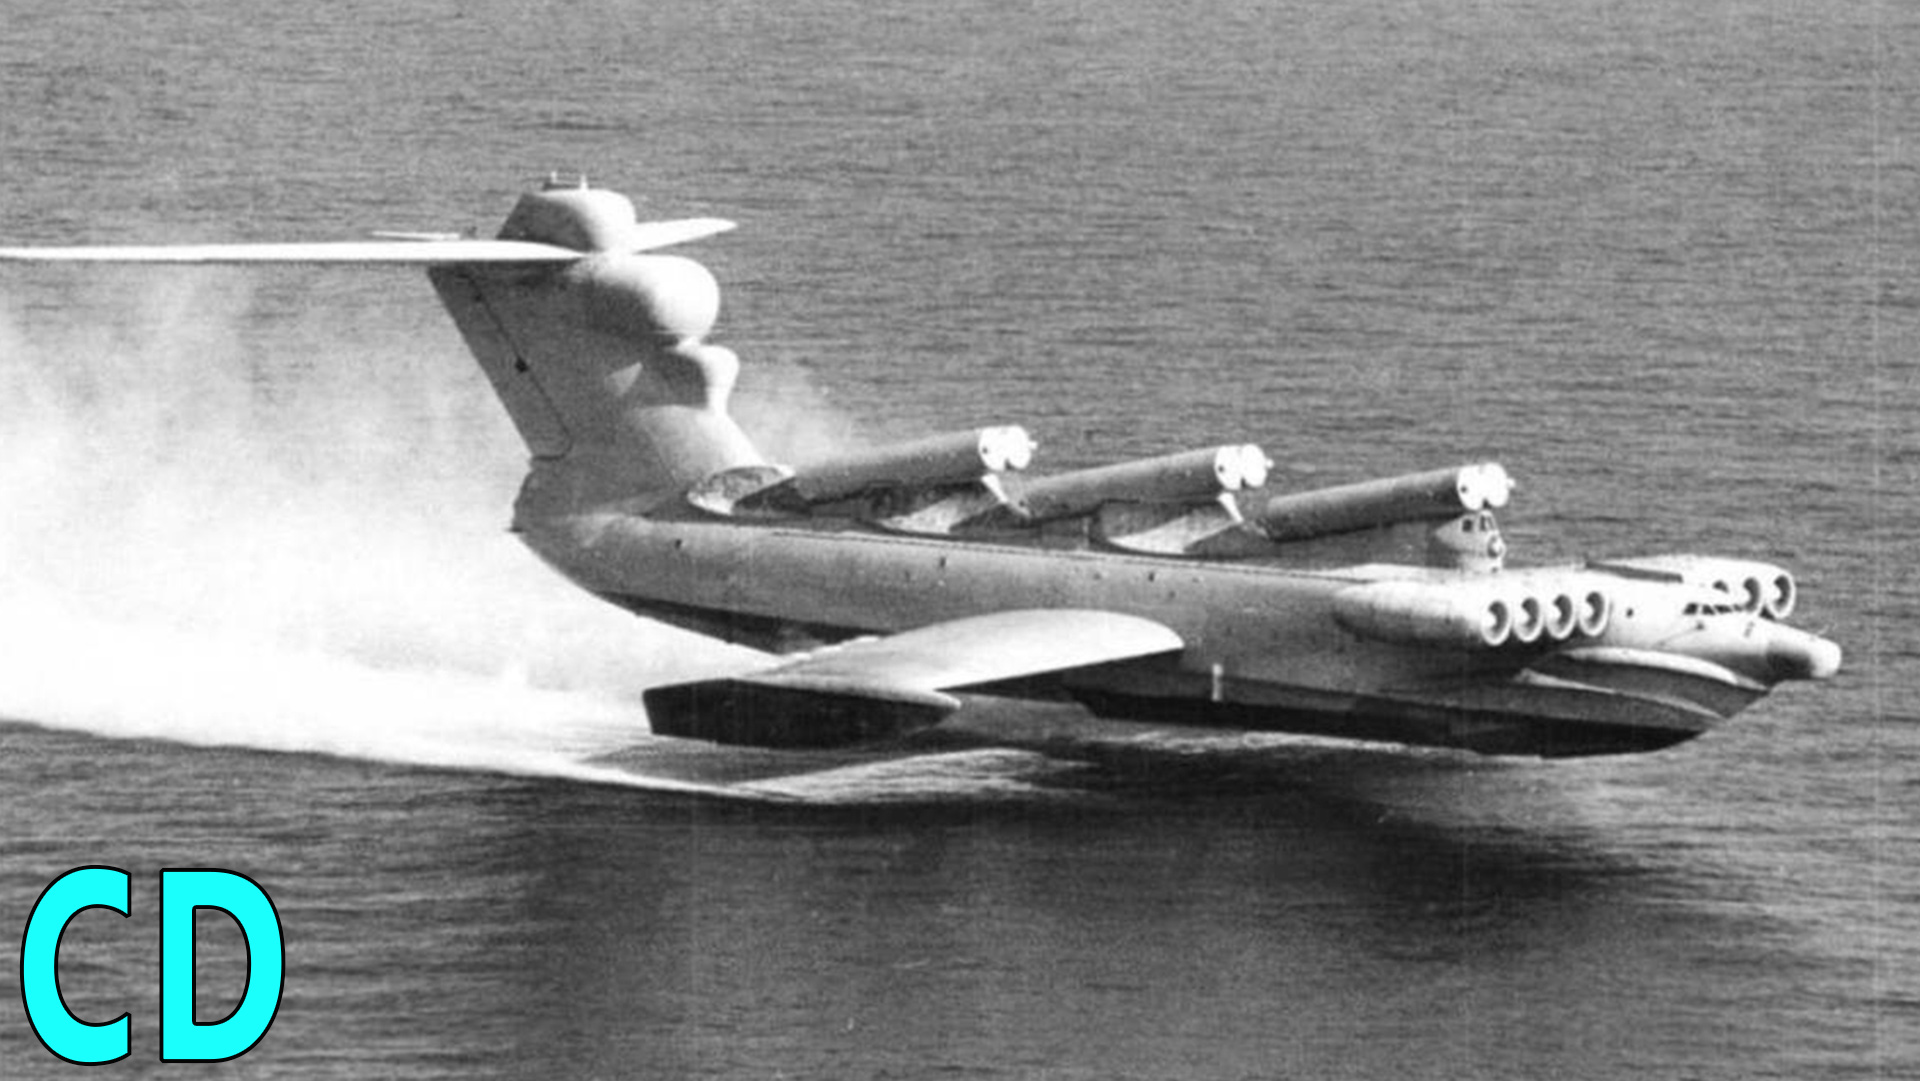 What happened to the Ekranoplan? The Caspian Sea Monster Curious Droid